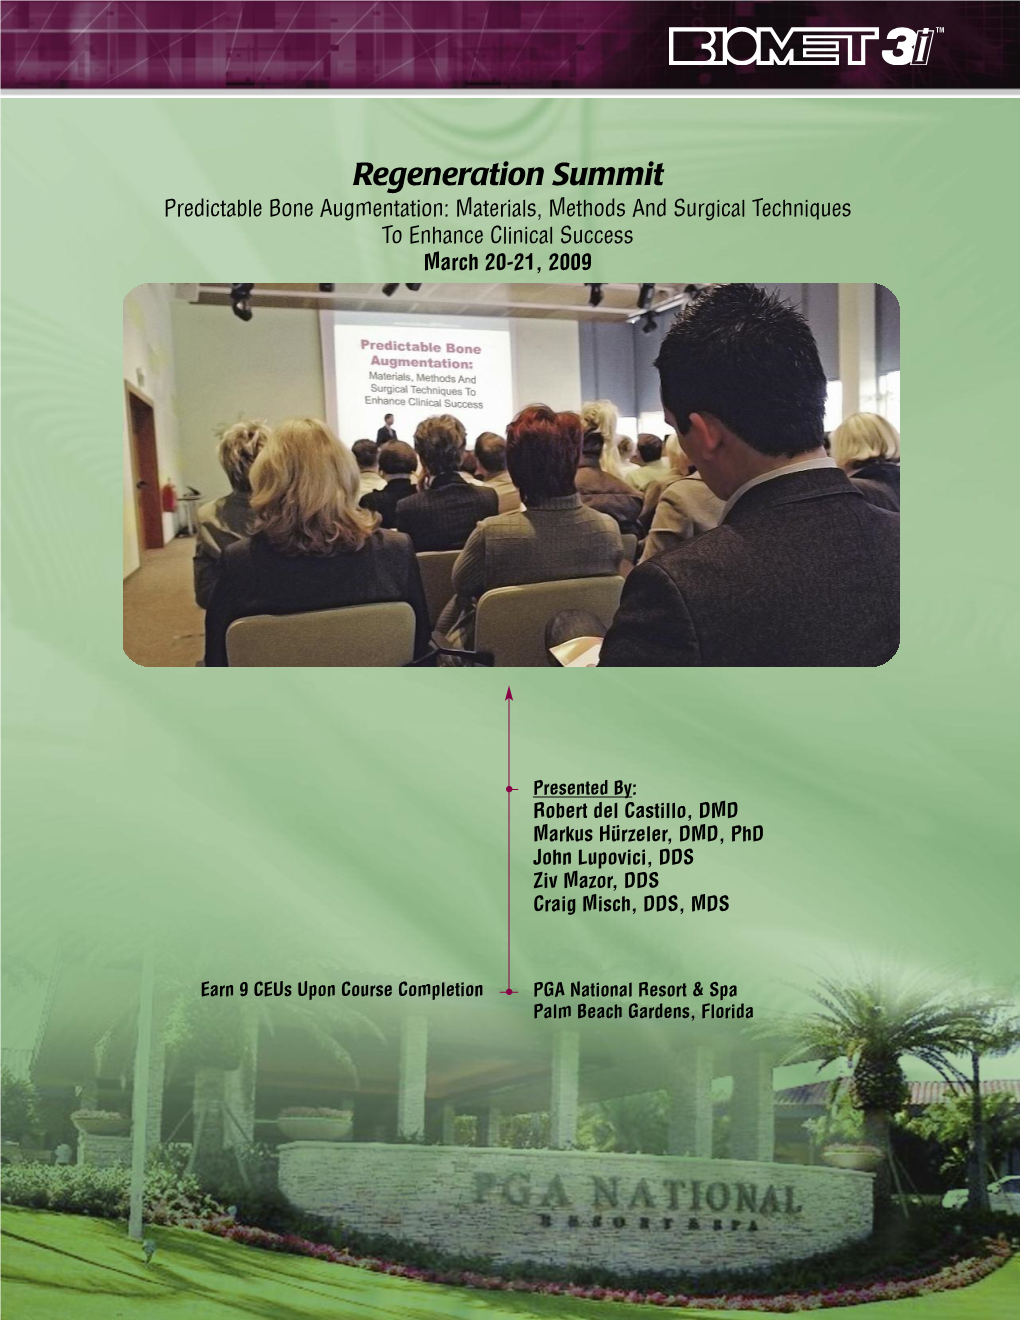 Regeneration Summit Predictable Bone Augmentation: Materials, Methods and Surgical Techniques to Enhance Clinical Success March 20-21, 2009